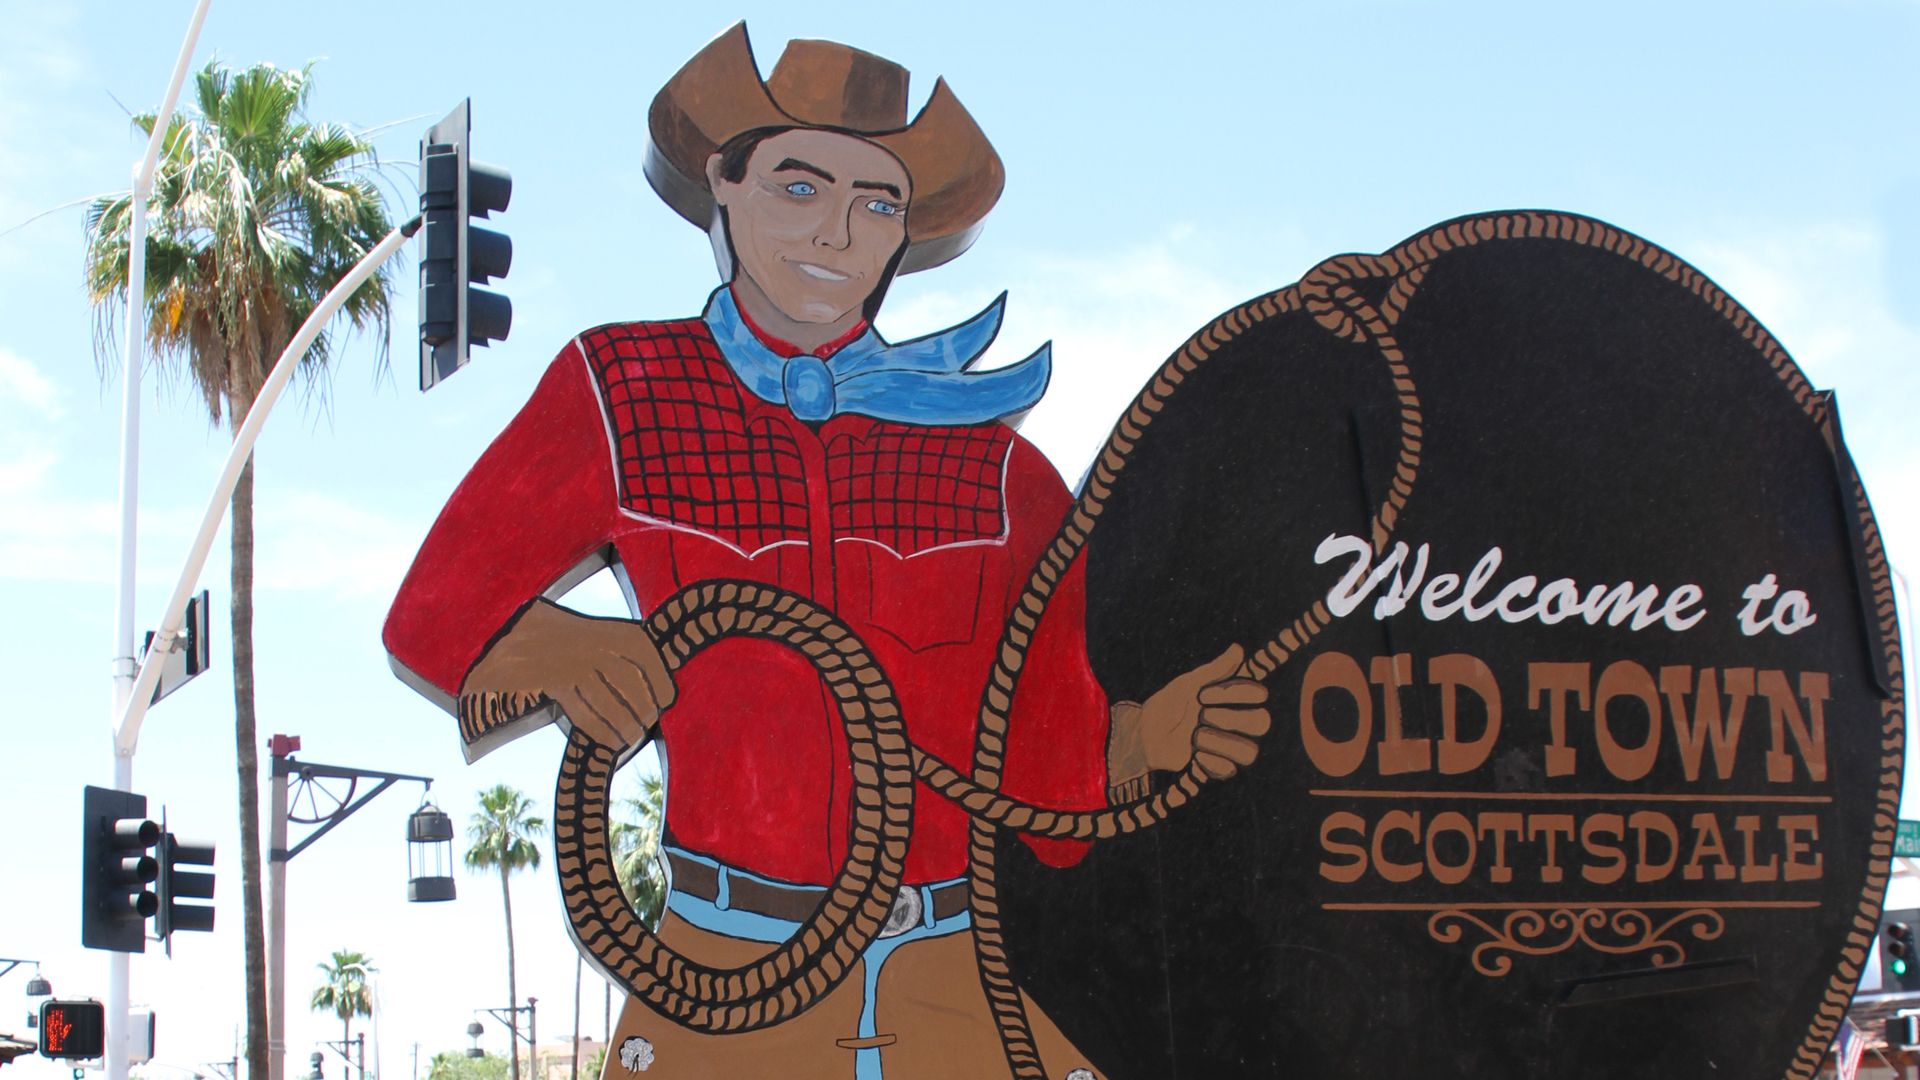 A large cowboy cutout with a sign that reads "Welcome to Old Town Scottsdale."